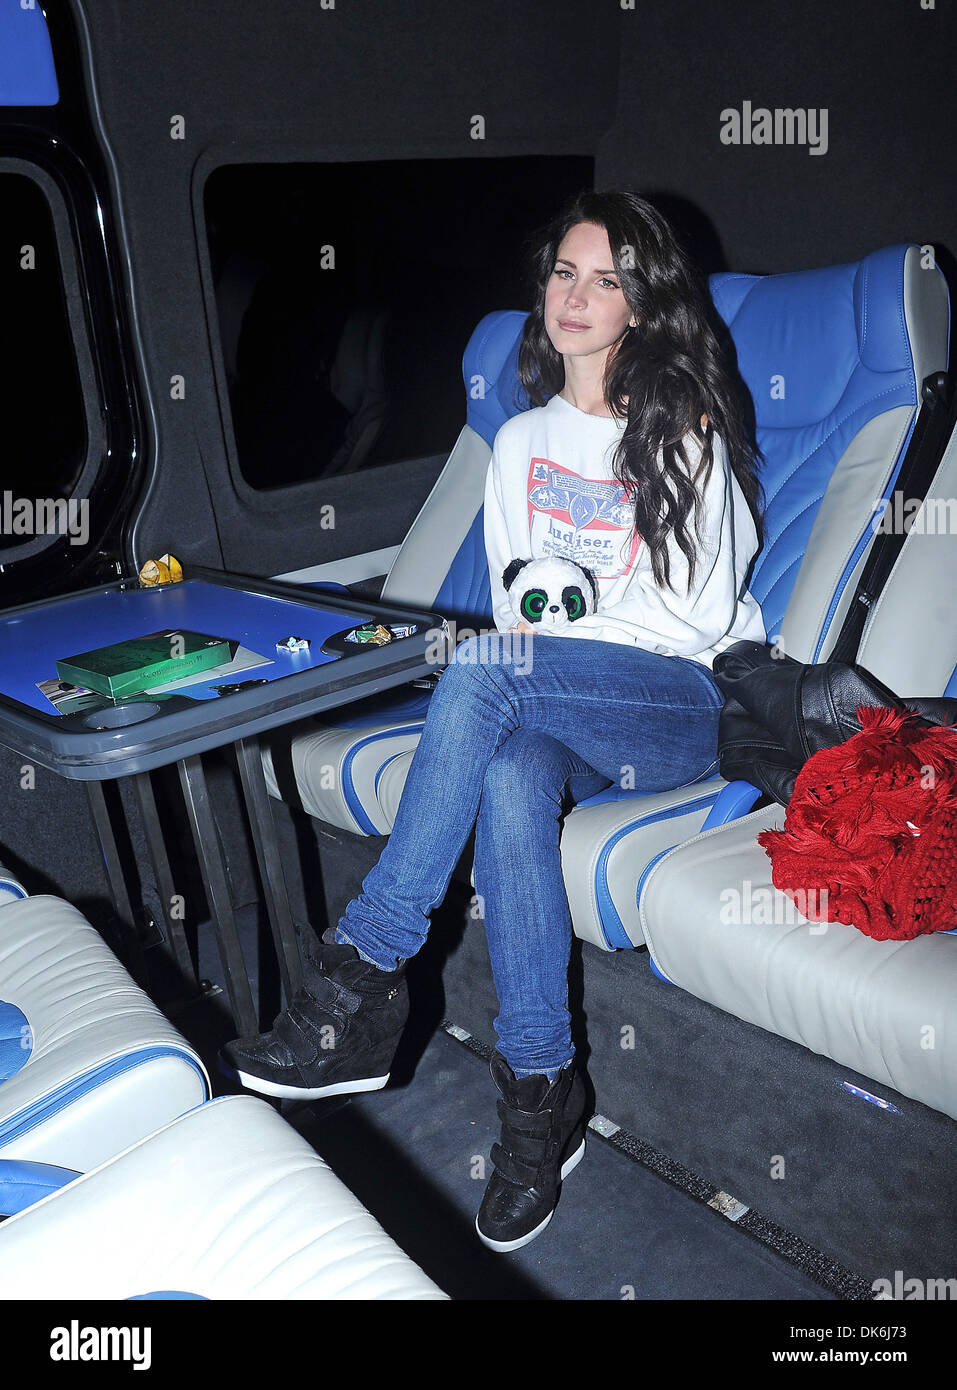 lana-del-rey-leaves-camden-roundhouse-after-performing-at-her-itunes-DK6J73.jpg